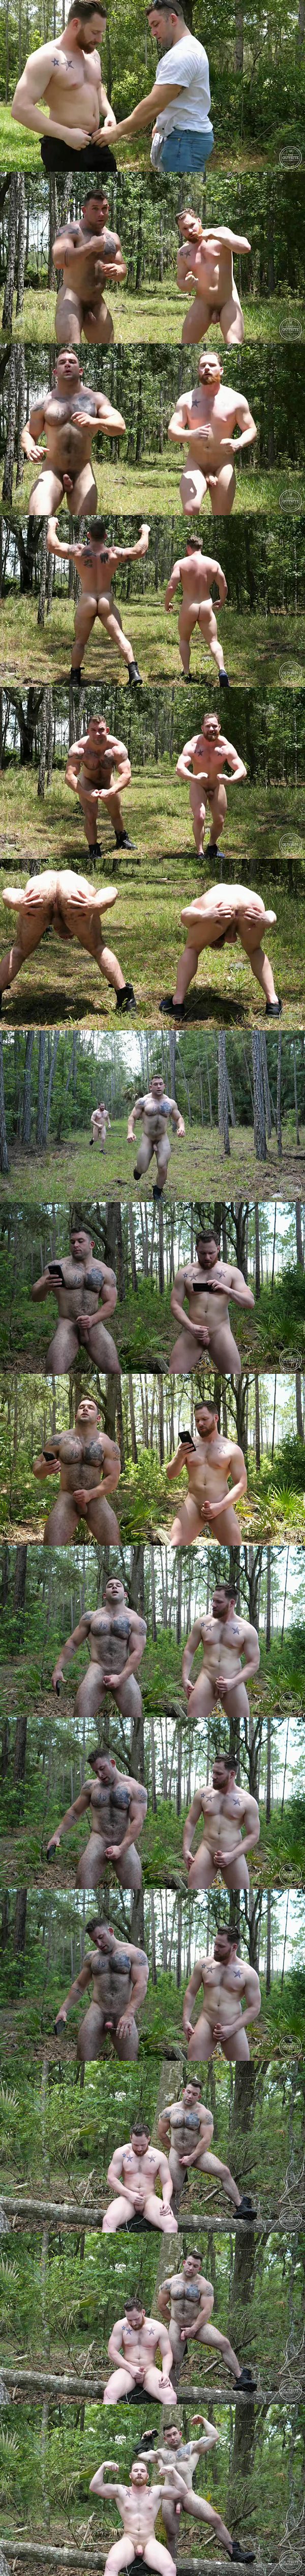 Muslce studs Jack and Randy (aka Owen Michaels) jerk off outdoors in 2 Swinging Dicks In The Woods at Theguysite 01